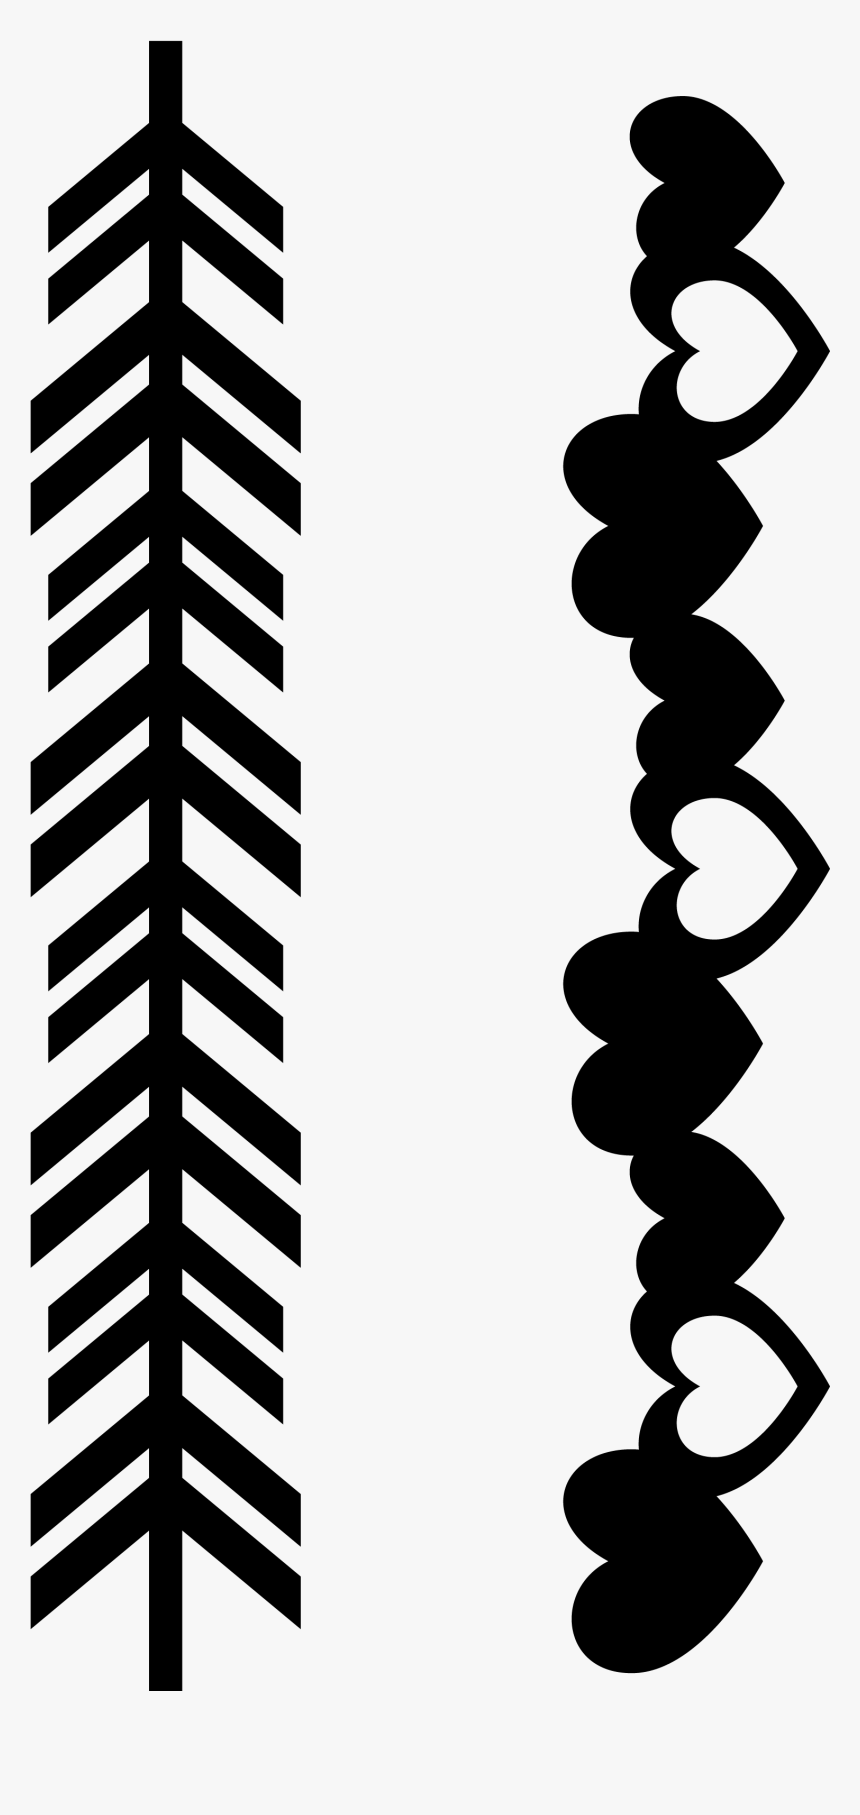 Download Clip Art Free Arrow Border Clipart Border Line Clipart Black And White Hd Png Download Kindpng